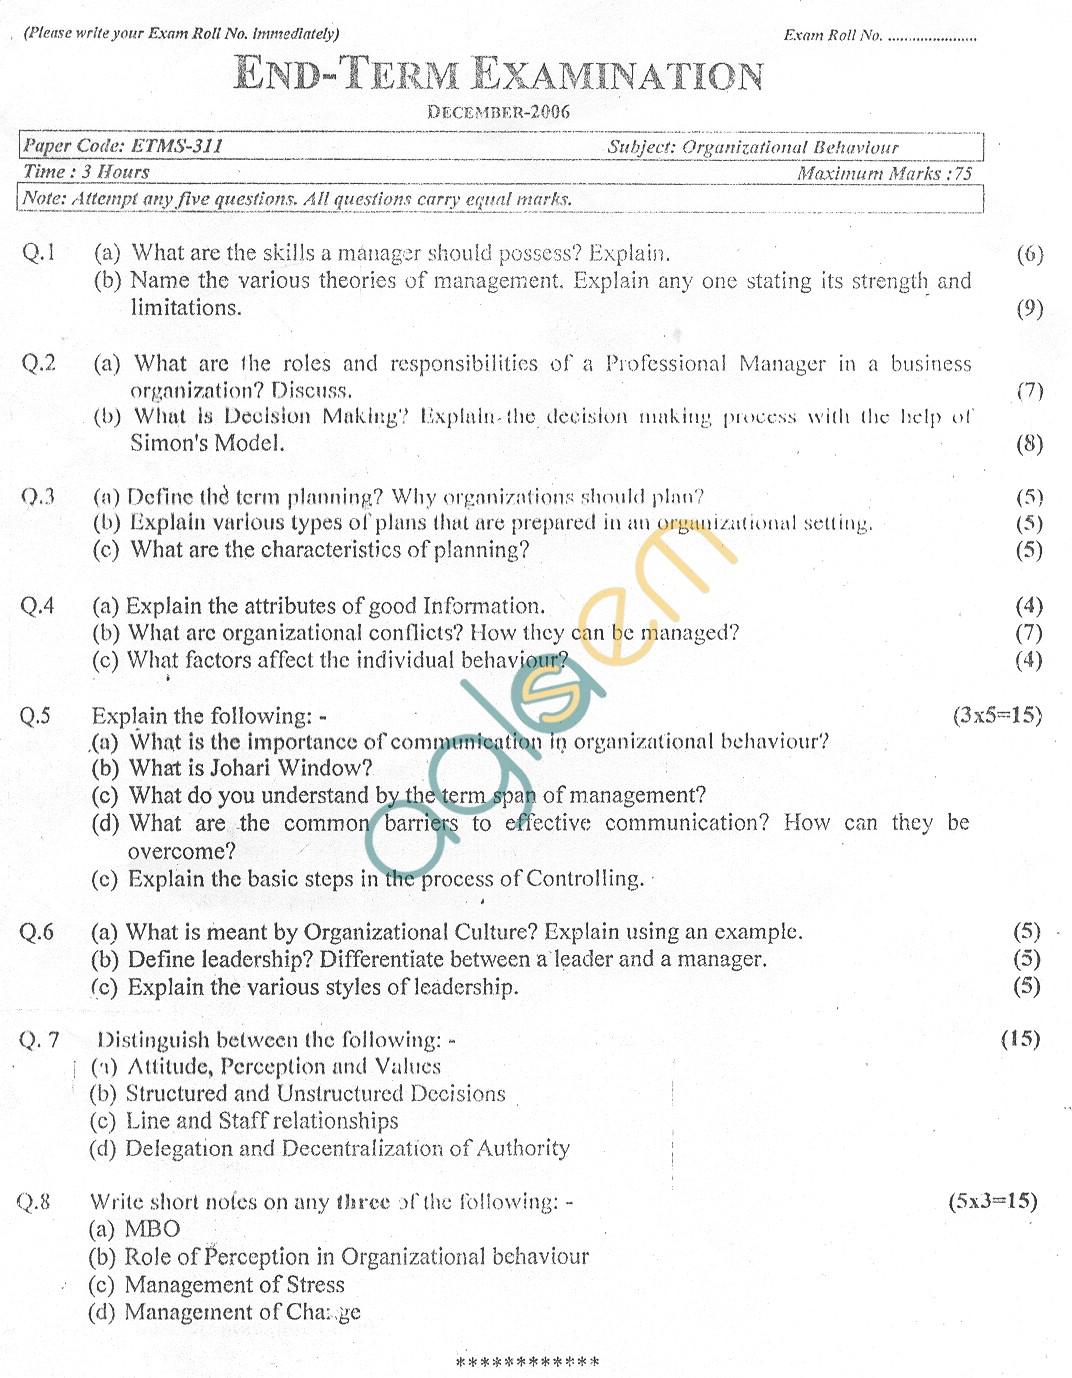 GGSIPU Question Papers Fifth Semester – end Term 2006 – ETMS-311